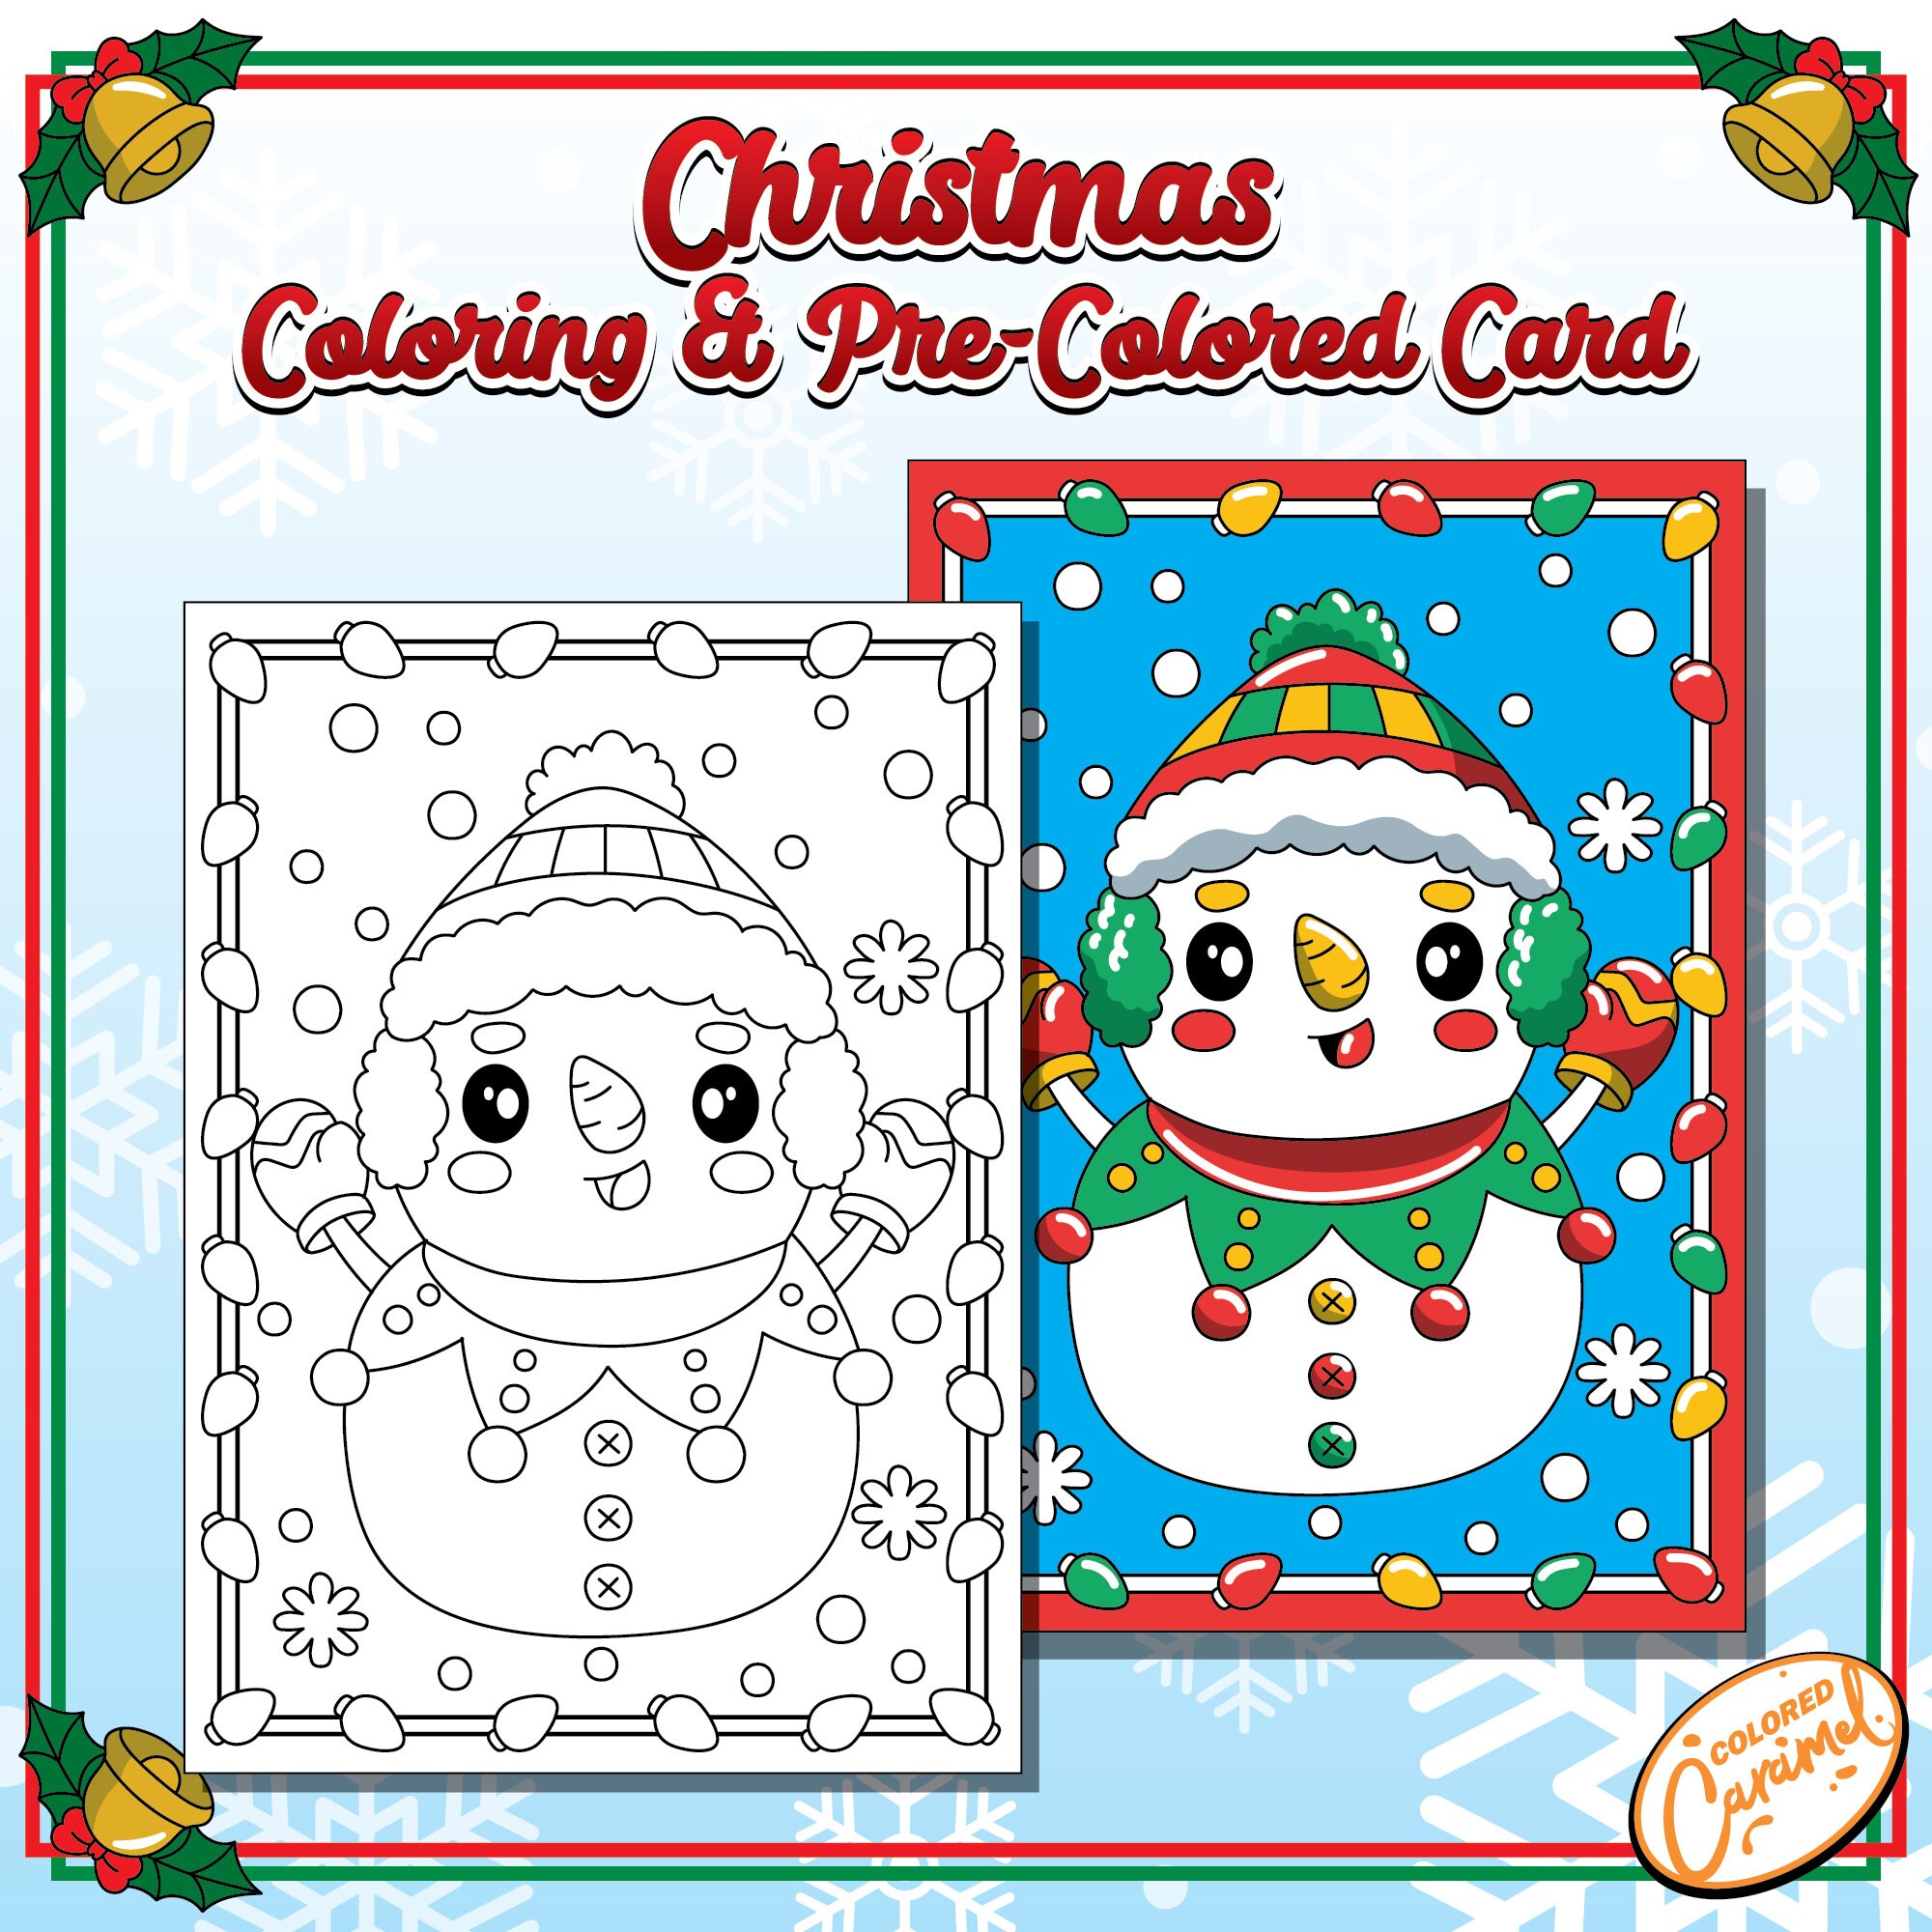 Merry Christmas Coloring Card for Kids, Colorable and Pre-colored Holiday Greeting Card, DIY Festive Printable Instant Digital Download